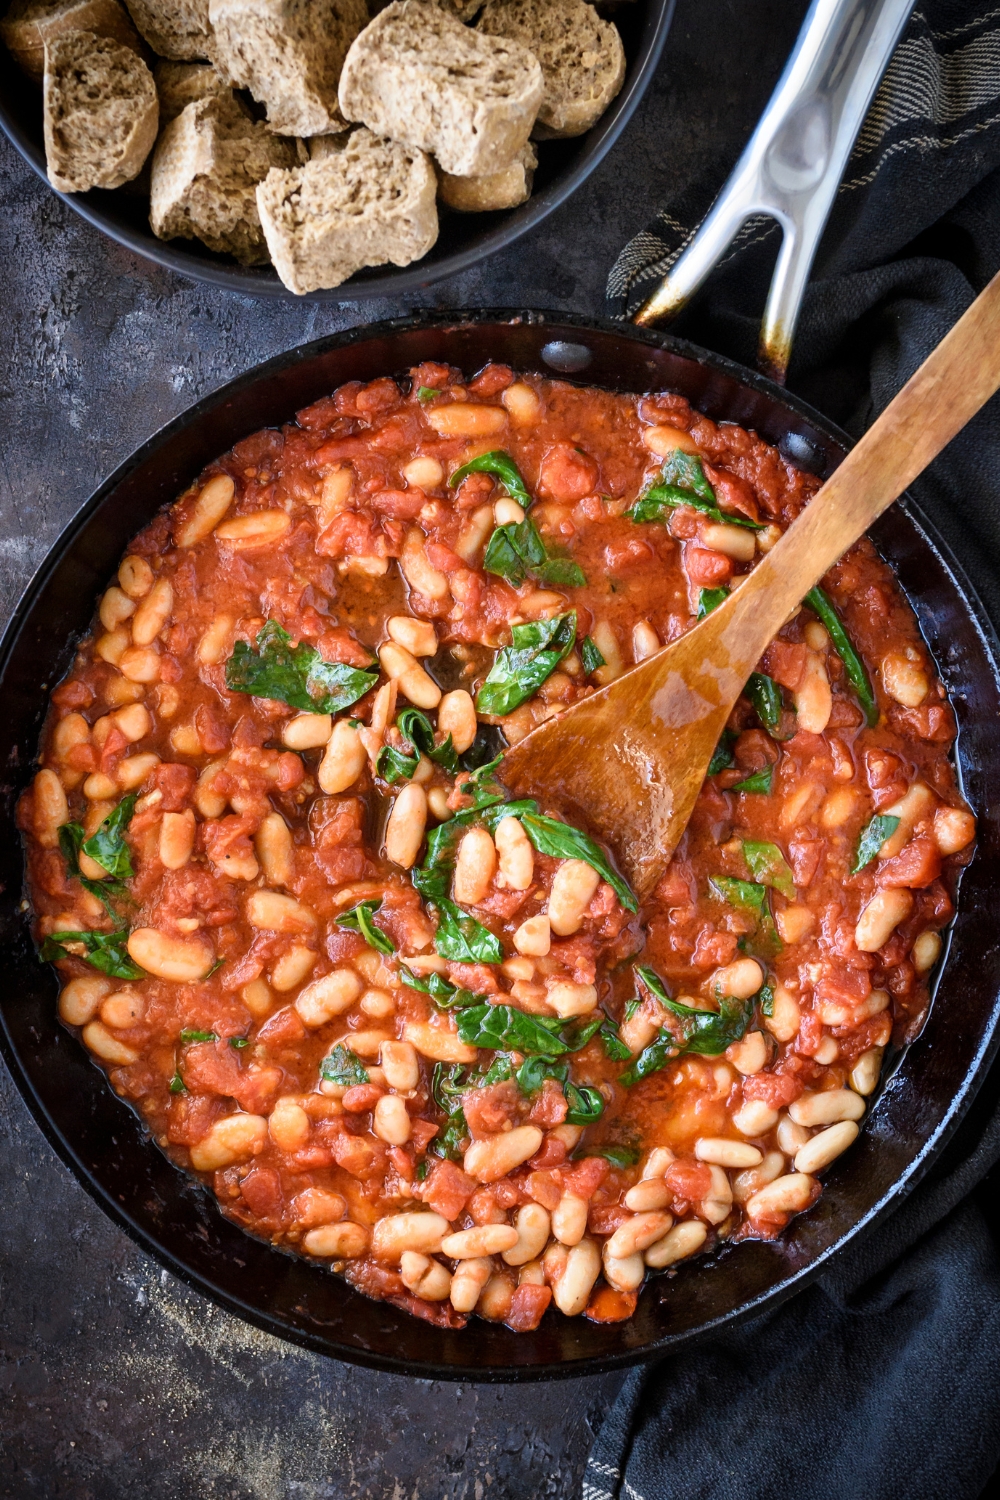 A skillet filled with tomato sauce, spinach, and white beans. There is a wooden spoon in the skillet.